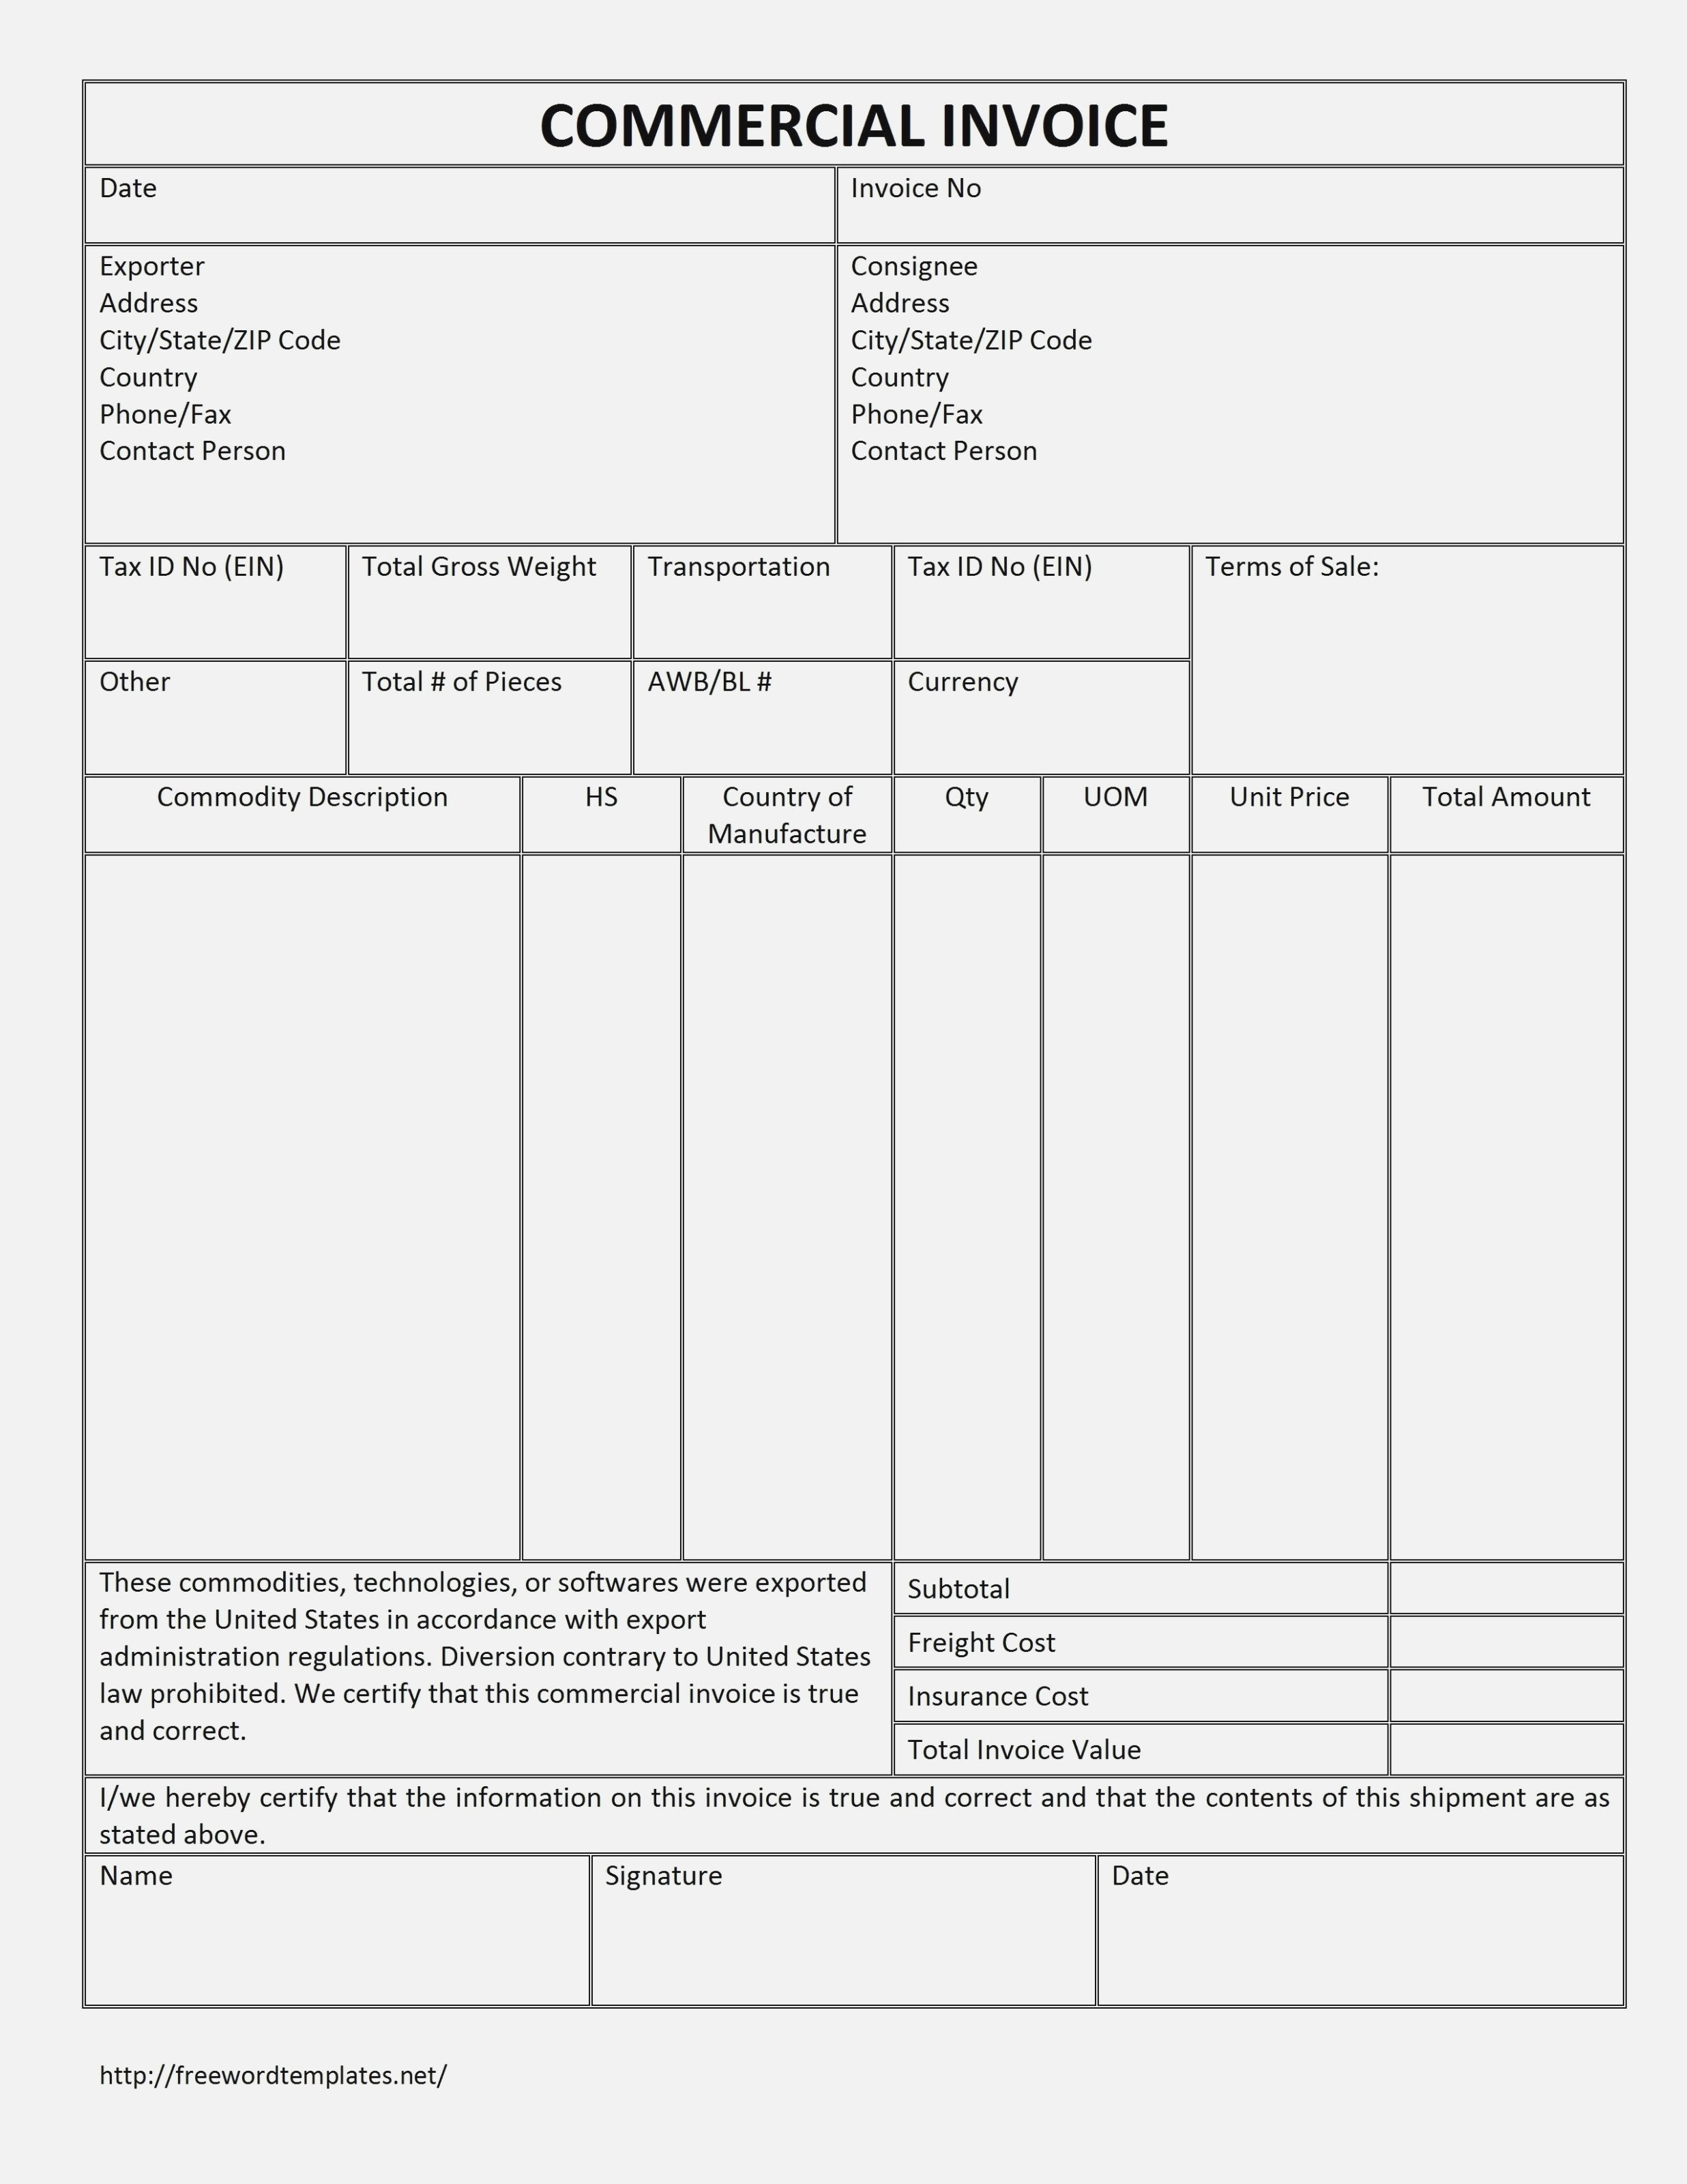 Things You Won't Miss  Realty Executives Mi  Invoice And Resume in International Shipping Invoice Template